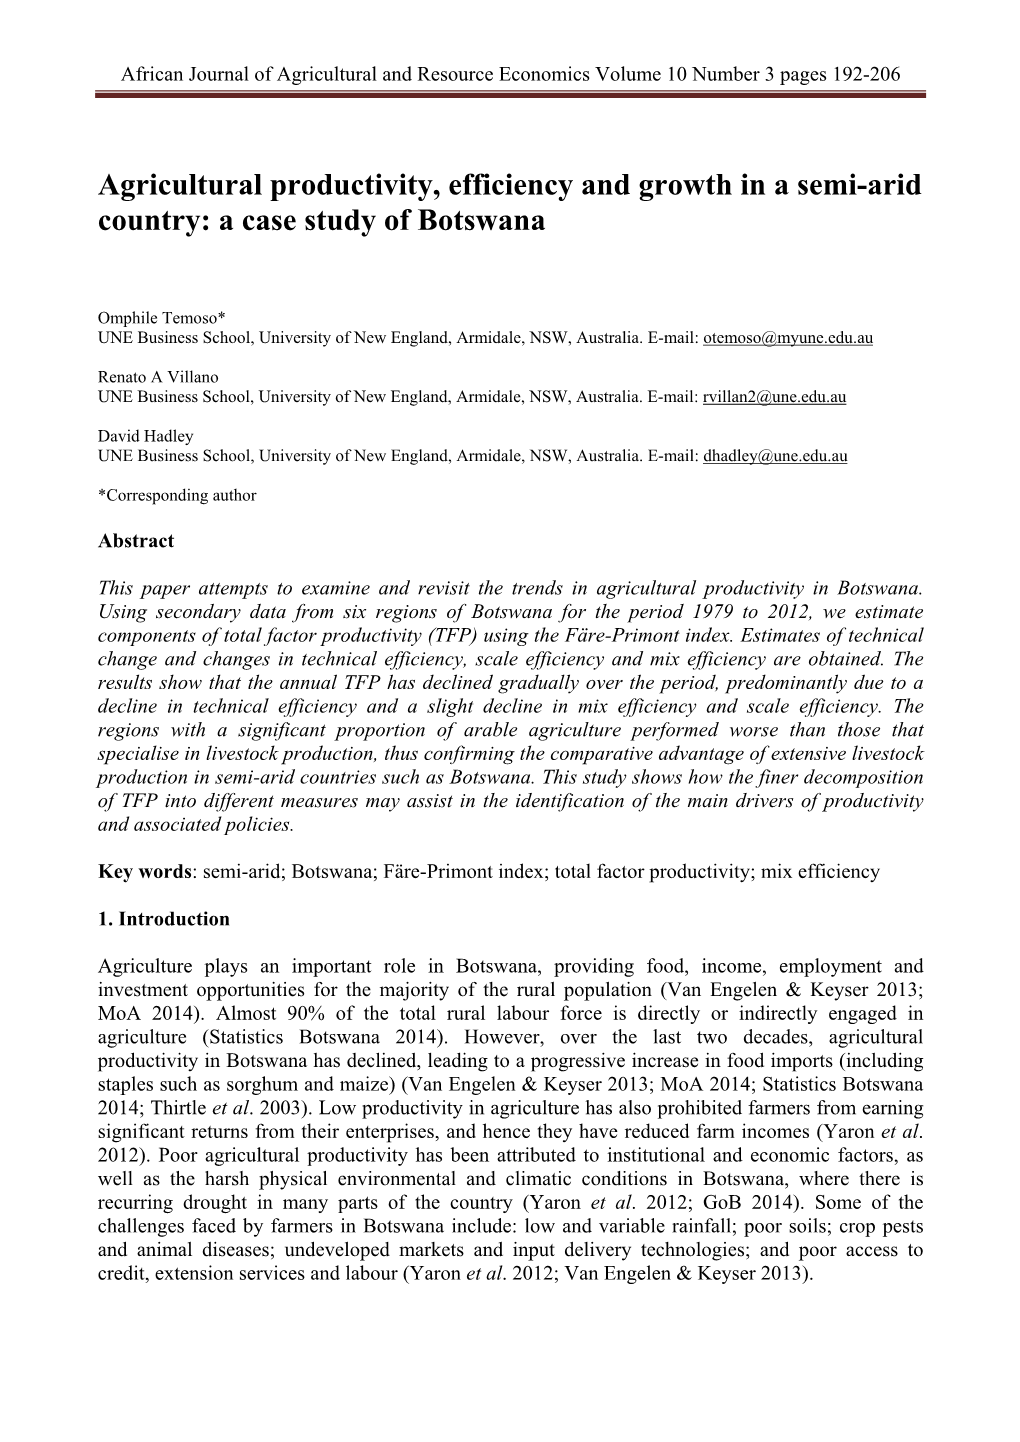 Agricultural Productivity, Efficiency and Growth in a Semi-Arid Country: a Case Study of Botswana